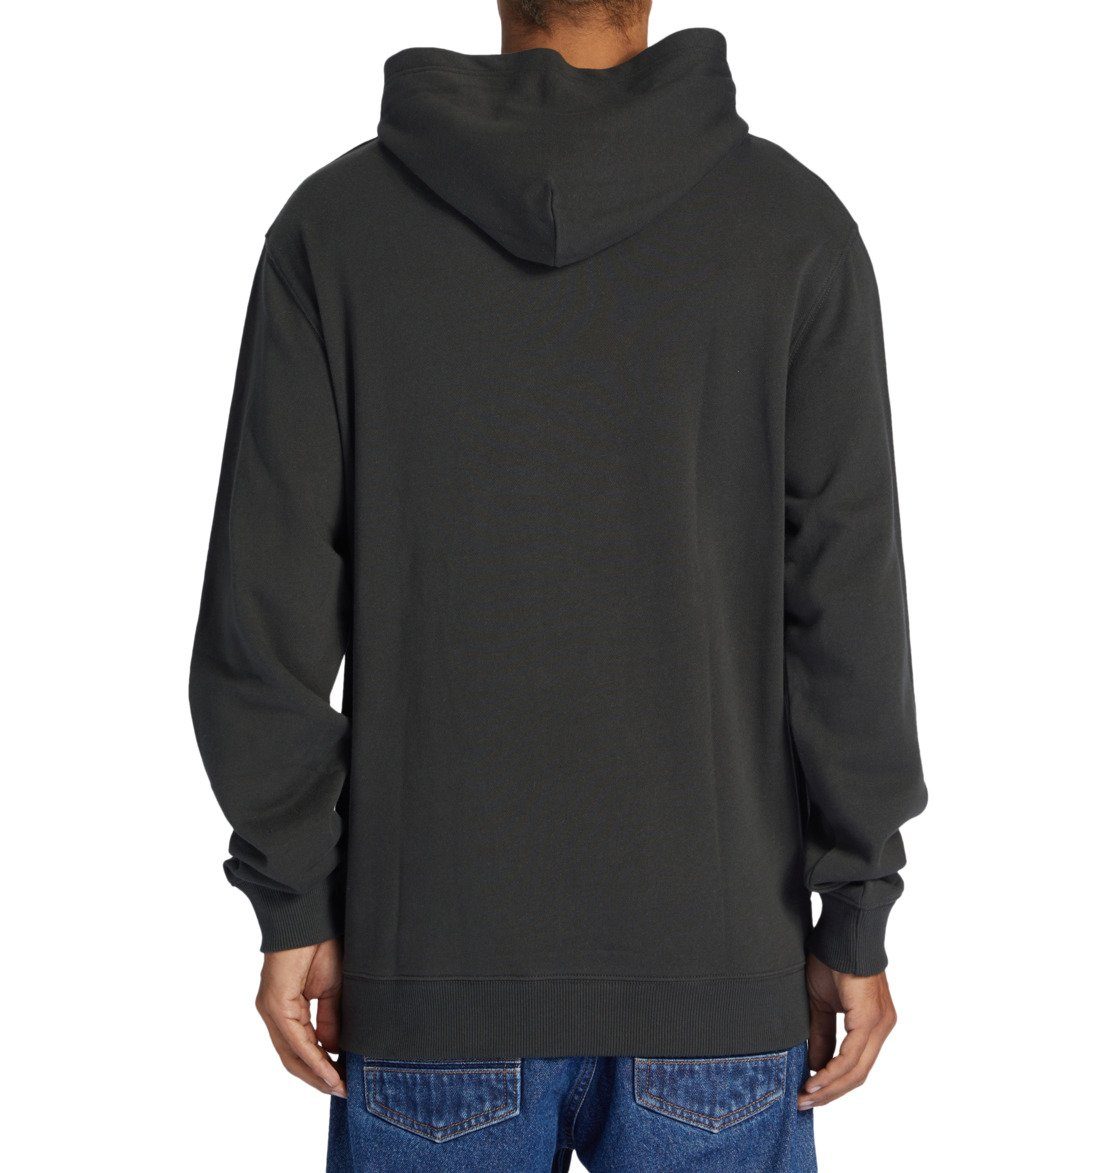 DC Shoes Hoodie Reserve